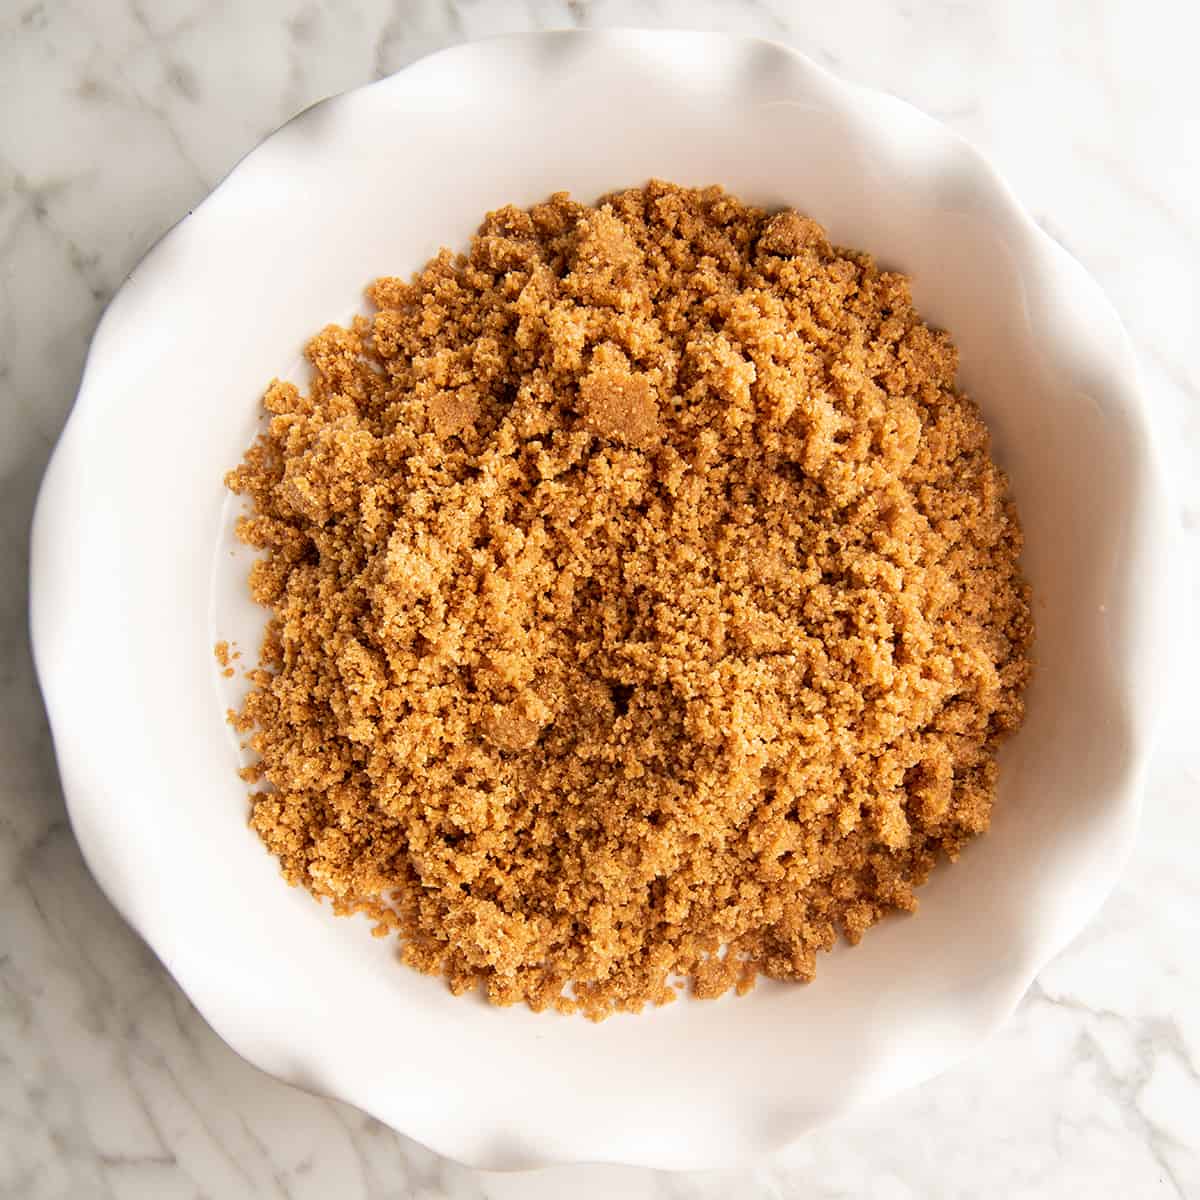 How to Make Graham Cracker Crust - pouring crust mixture into pie dish